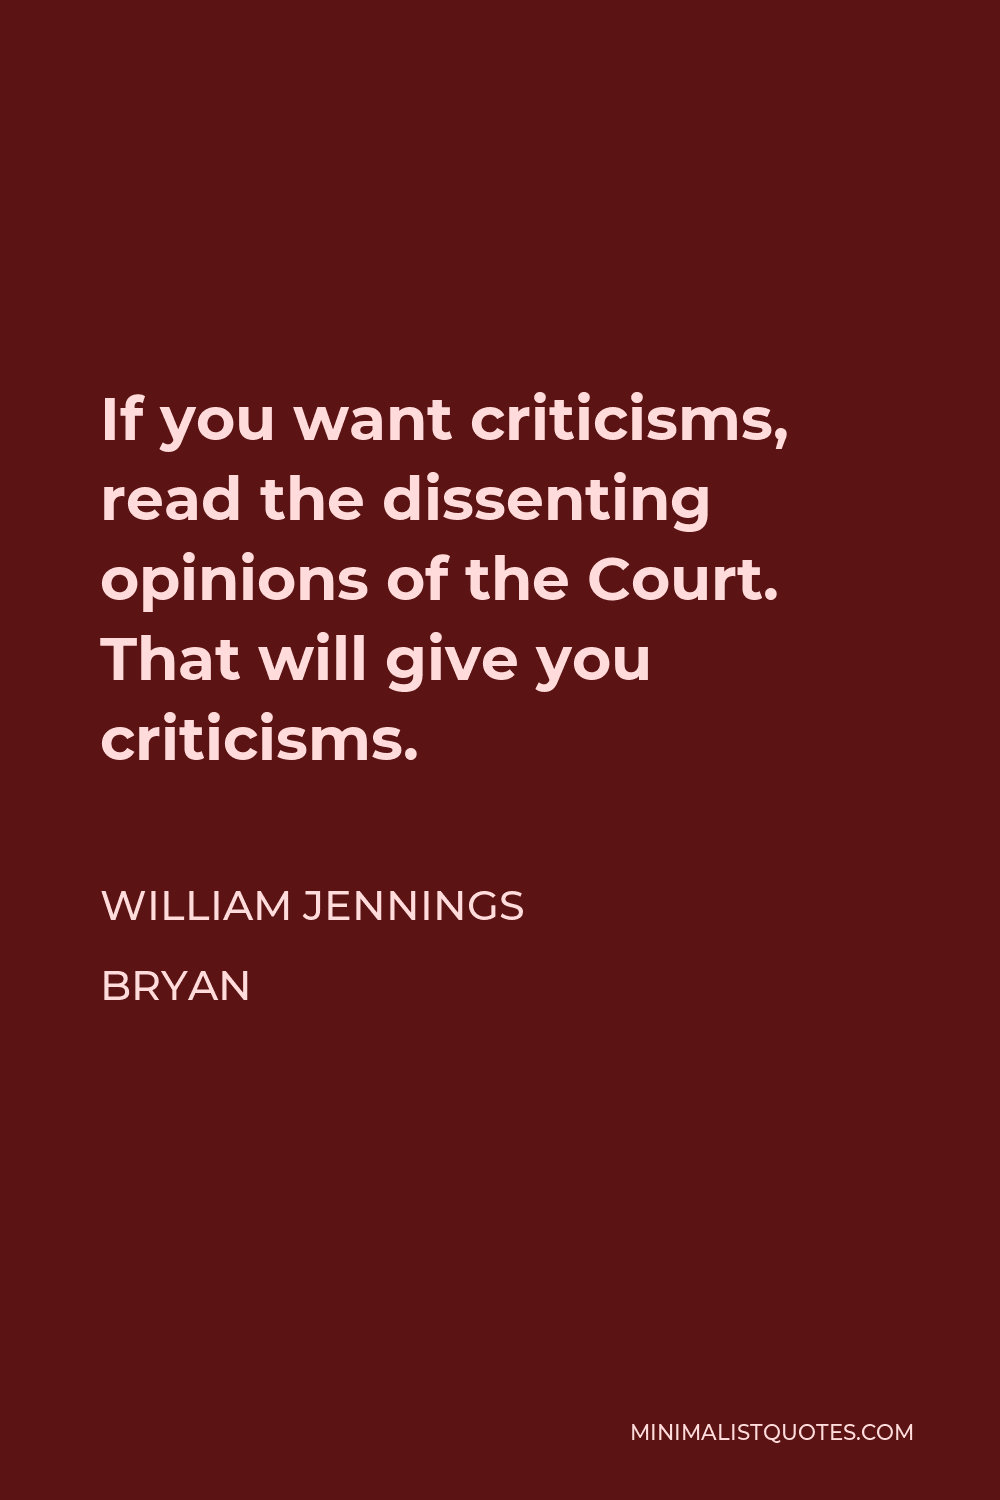 William Jennings Bryan Quote - If you want criticisms, read the dissenting opinions of the Court. That will give you criticisms.